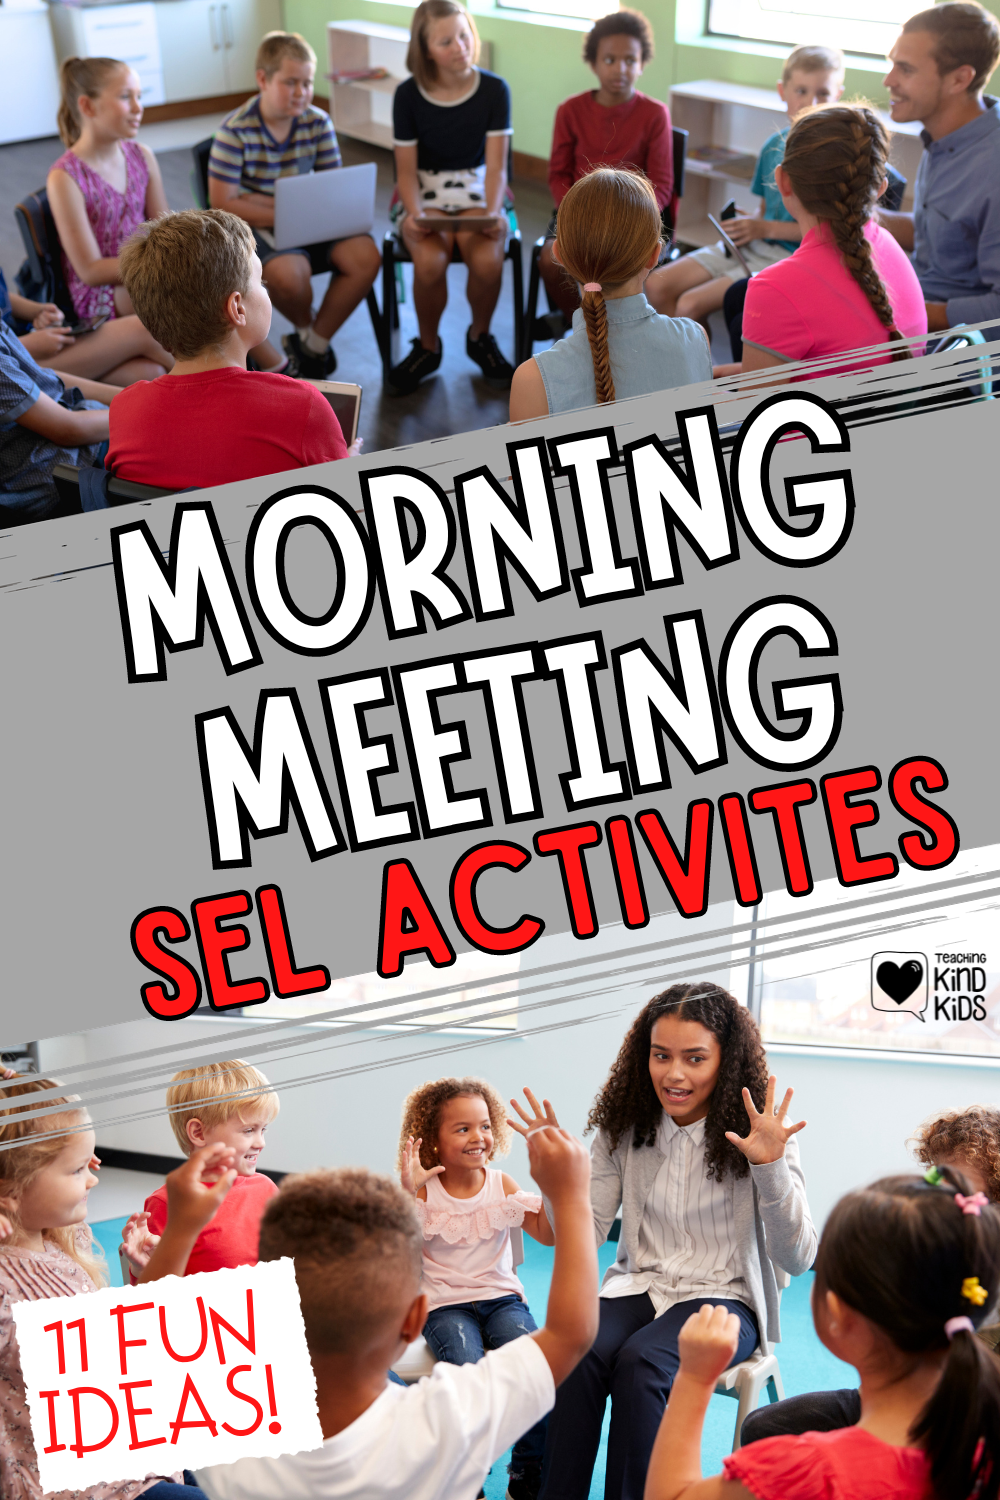 11 Morning Meeting SEL Activities for Educators to use to start the day with more kindness and connect with students.